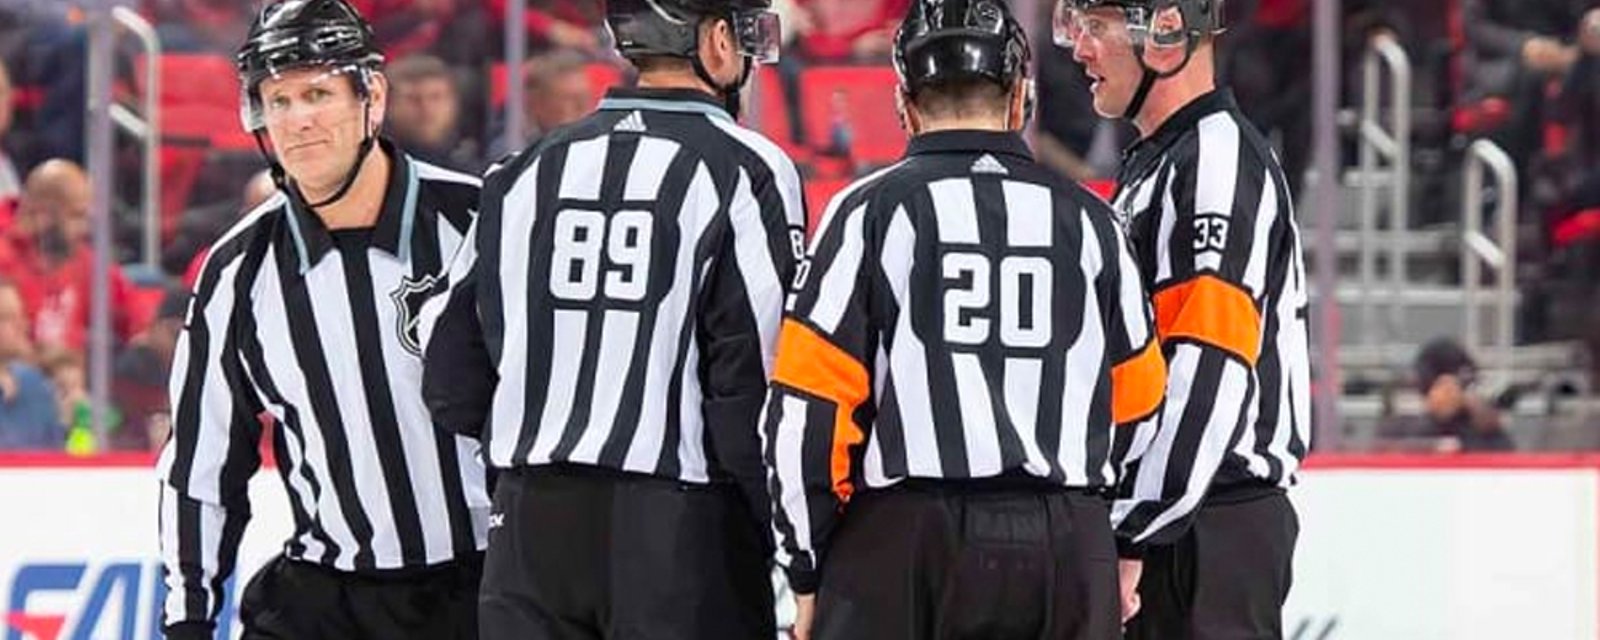 Report: NHL referees told to book flights home